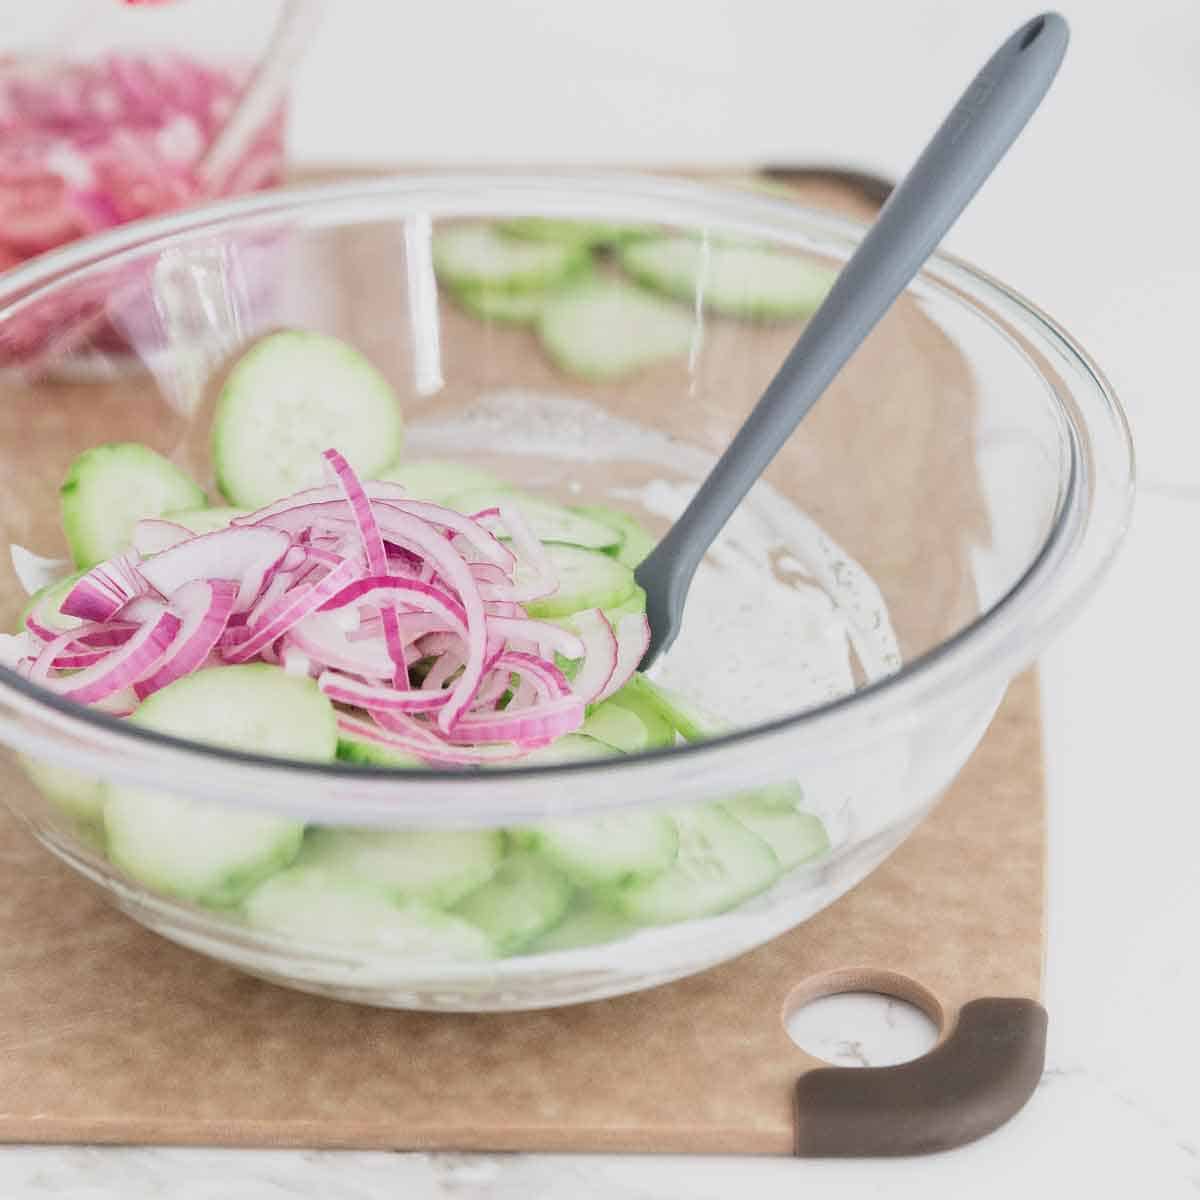 Quick pickled red onions add the perfect tangy flavor to this creamy cucumber dill salad recipe.